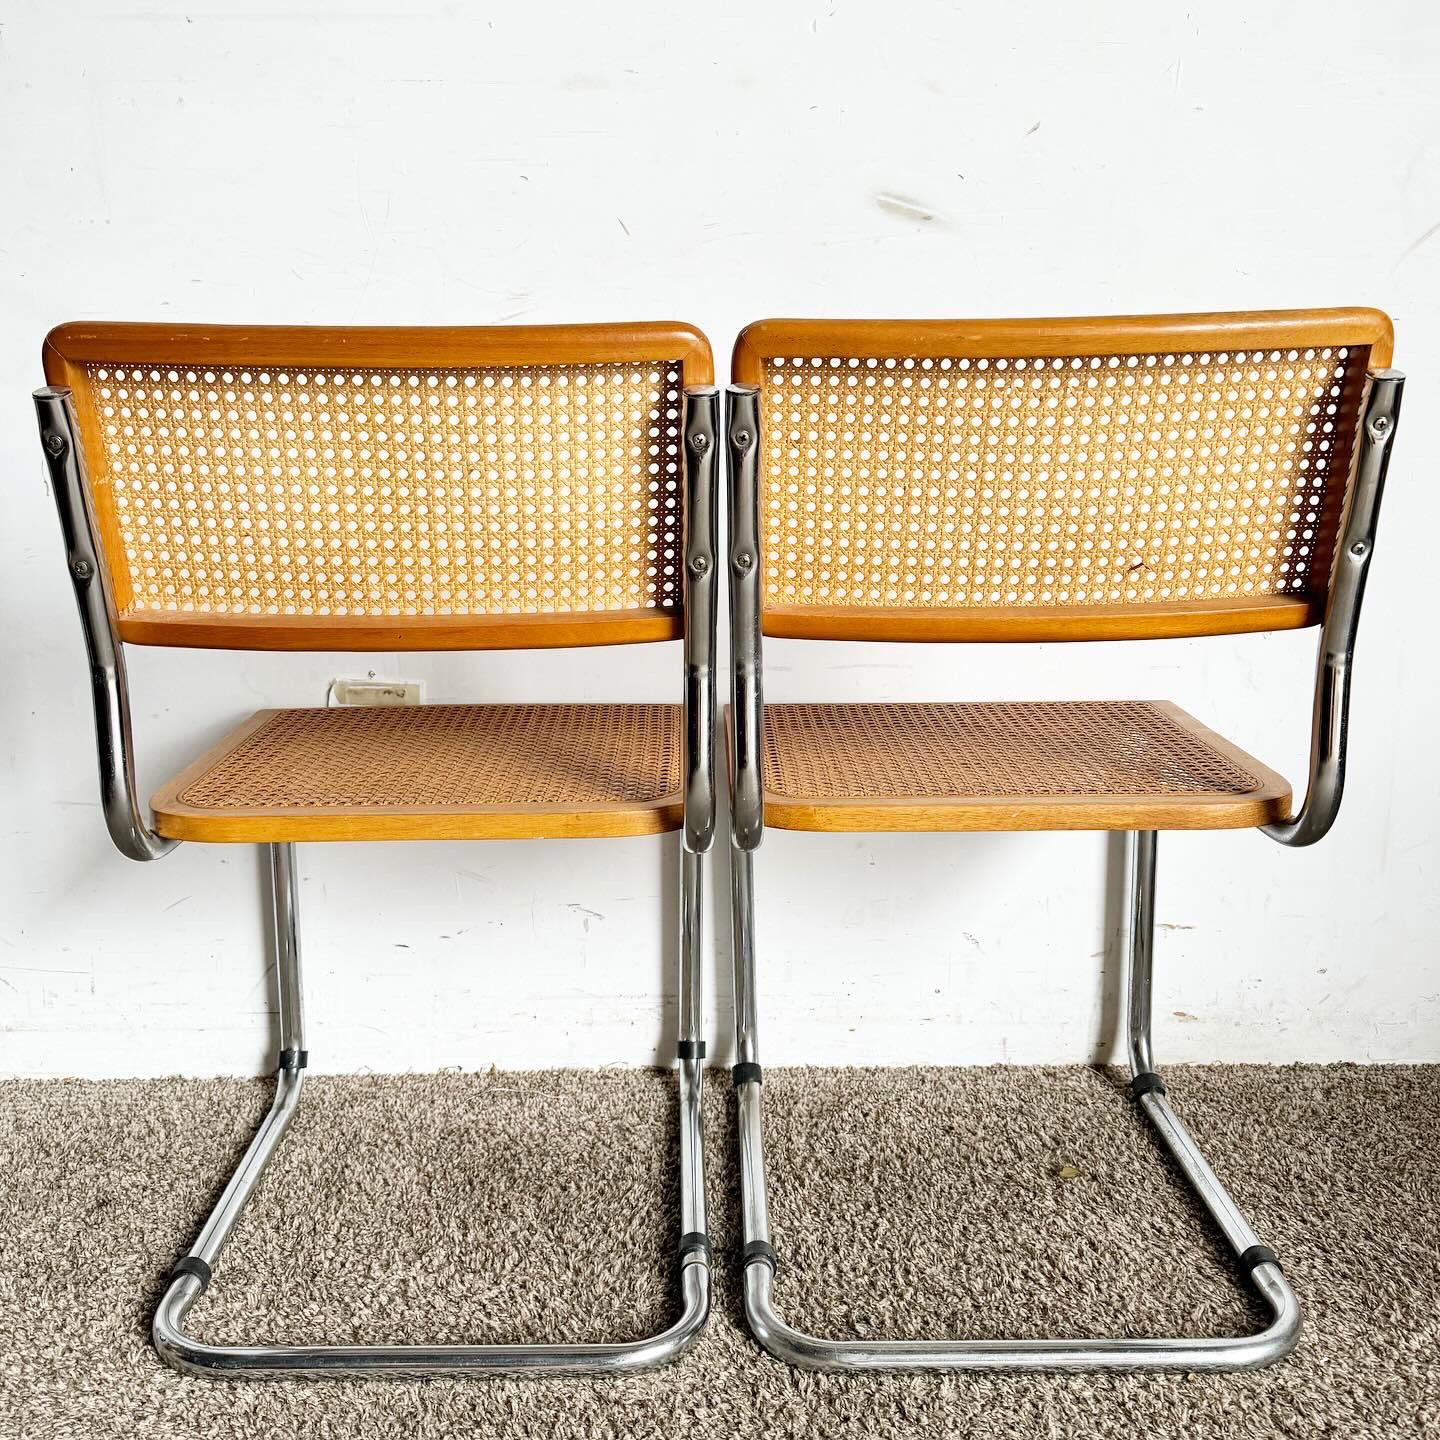 Embrace mid-century modern sophistication with these Chrome and Cane Marvel Breyer Style Cantilever Chairs. Featuring a sleek cantilever design, these chairs combine polished chrome frames with woven cane, offering a striking material contrast.